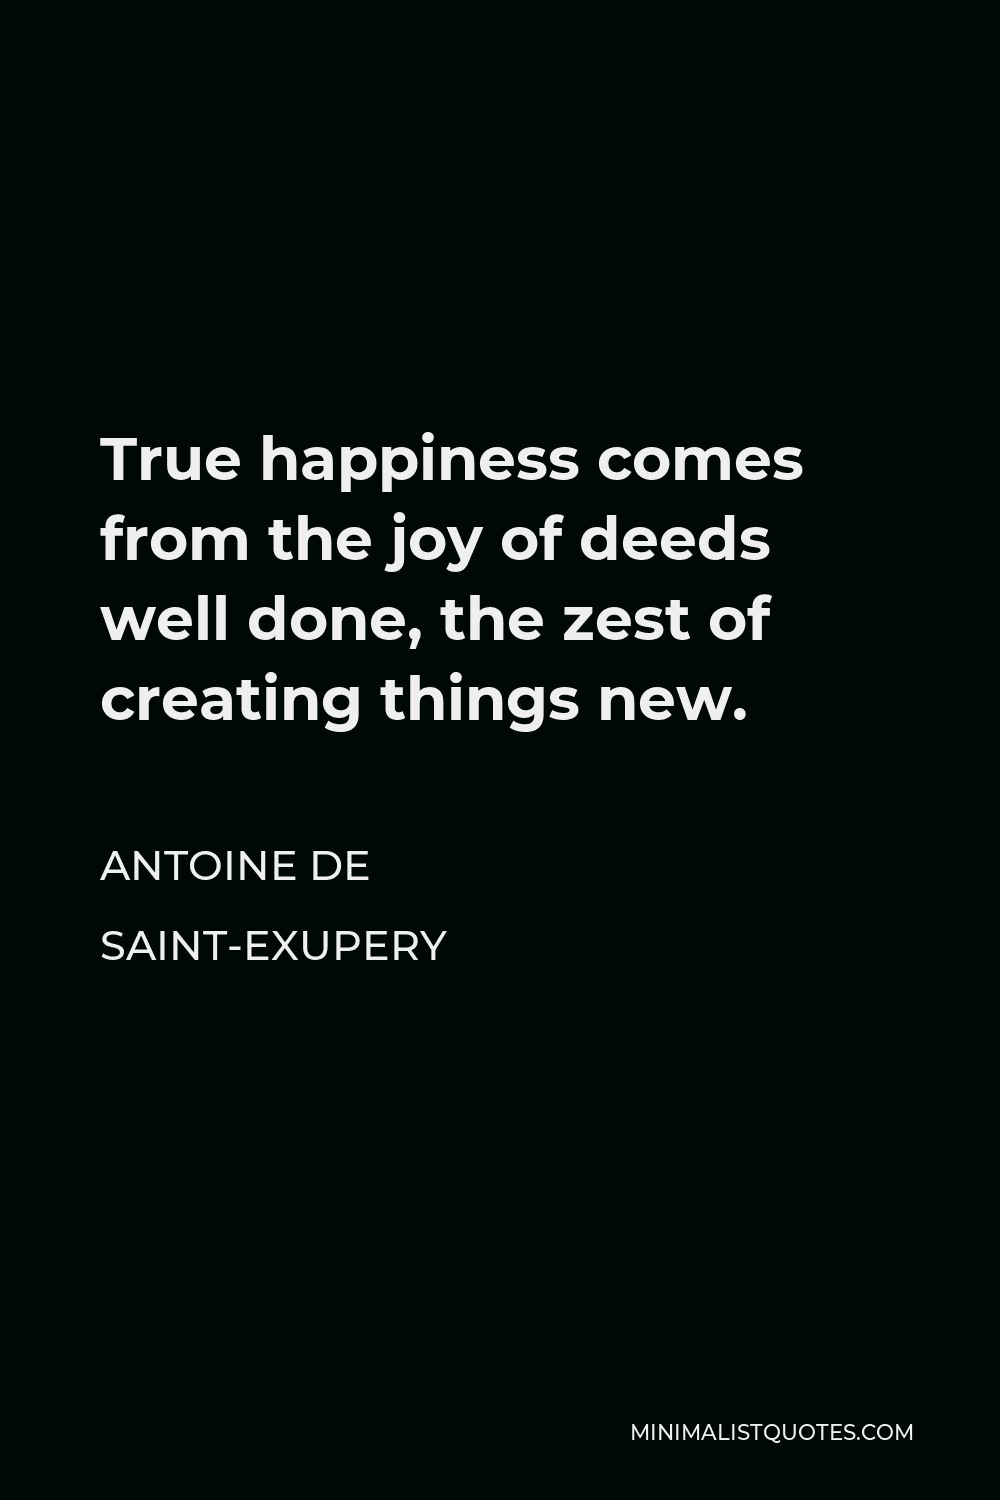 Antoine de Saint-Exupery Quote - True happiness comes from the joy of deeds well done, the zest of creating things new.